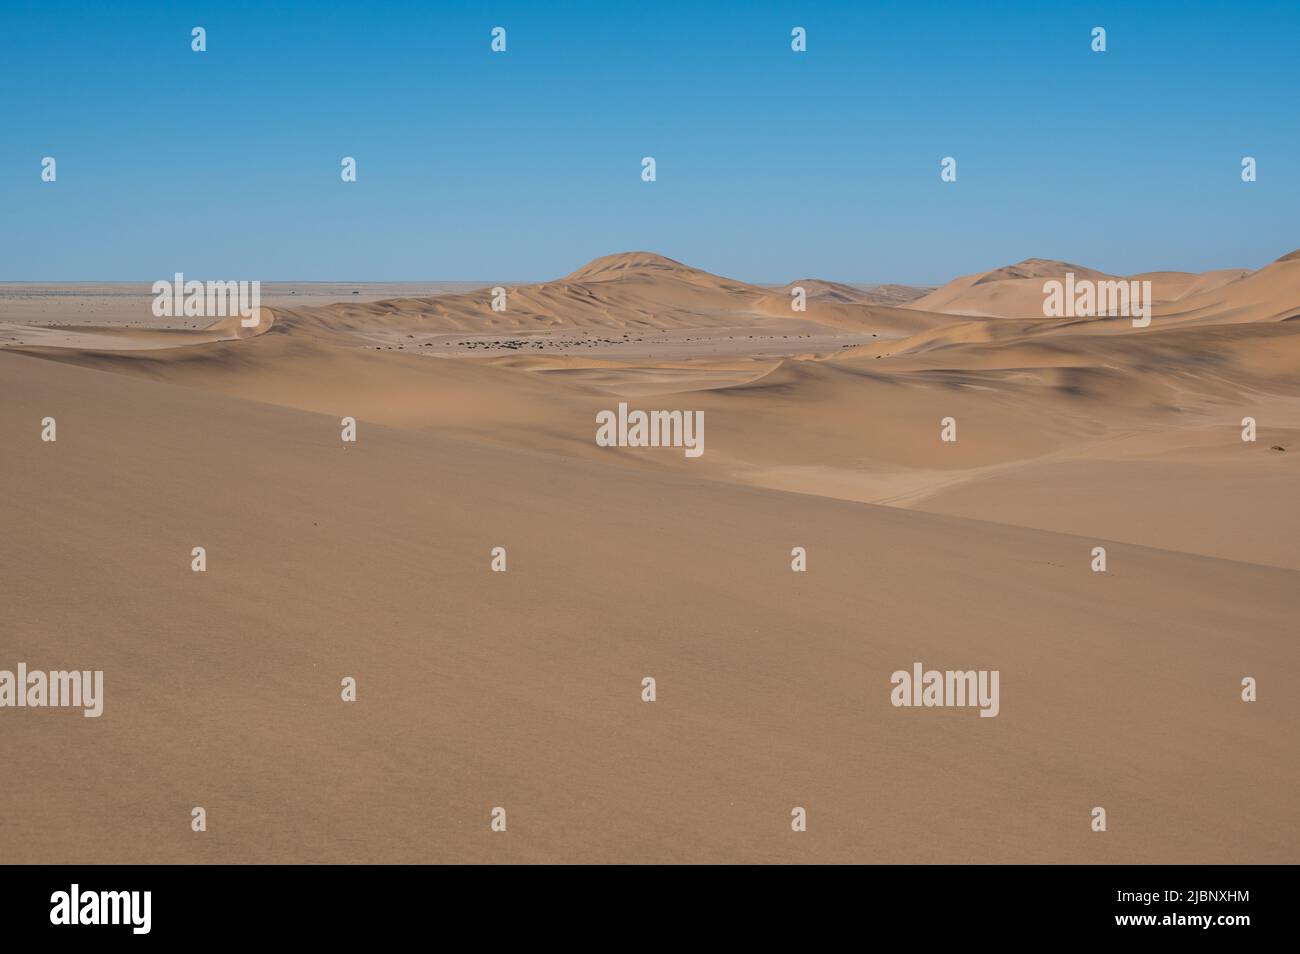 Sand structures in the Namibian desert Stock Photo